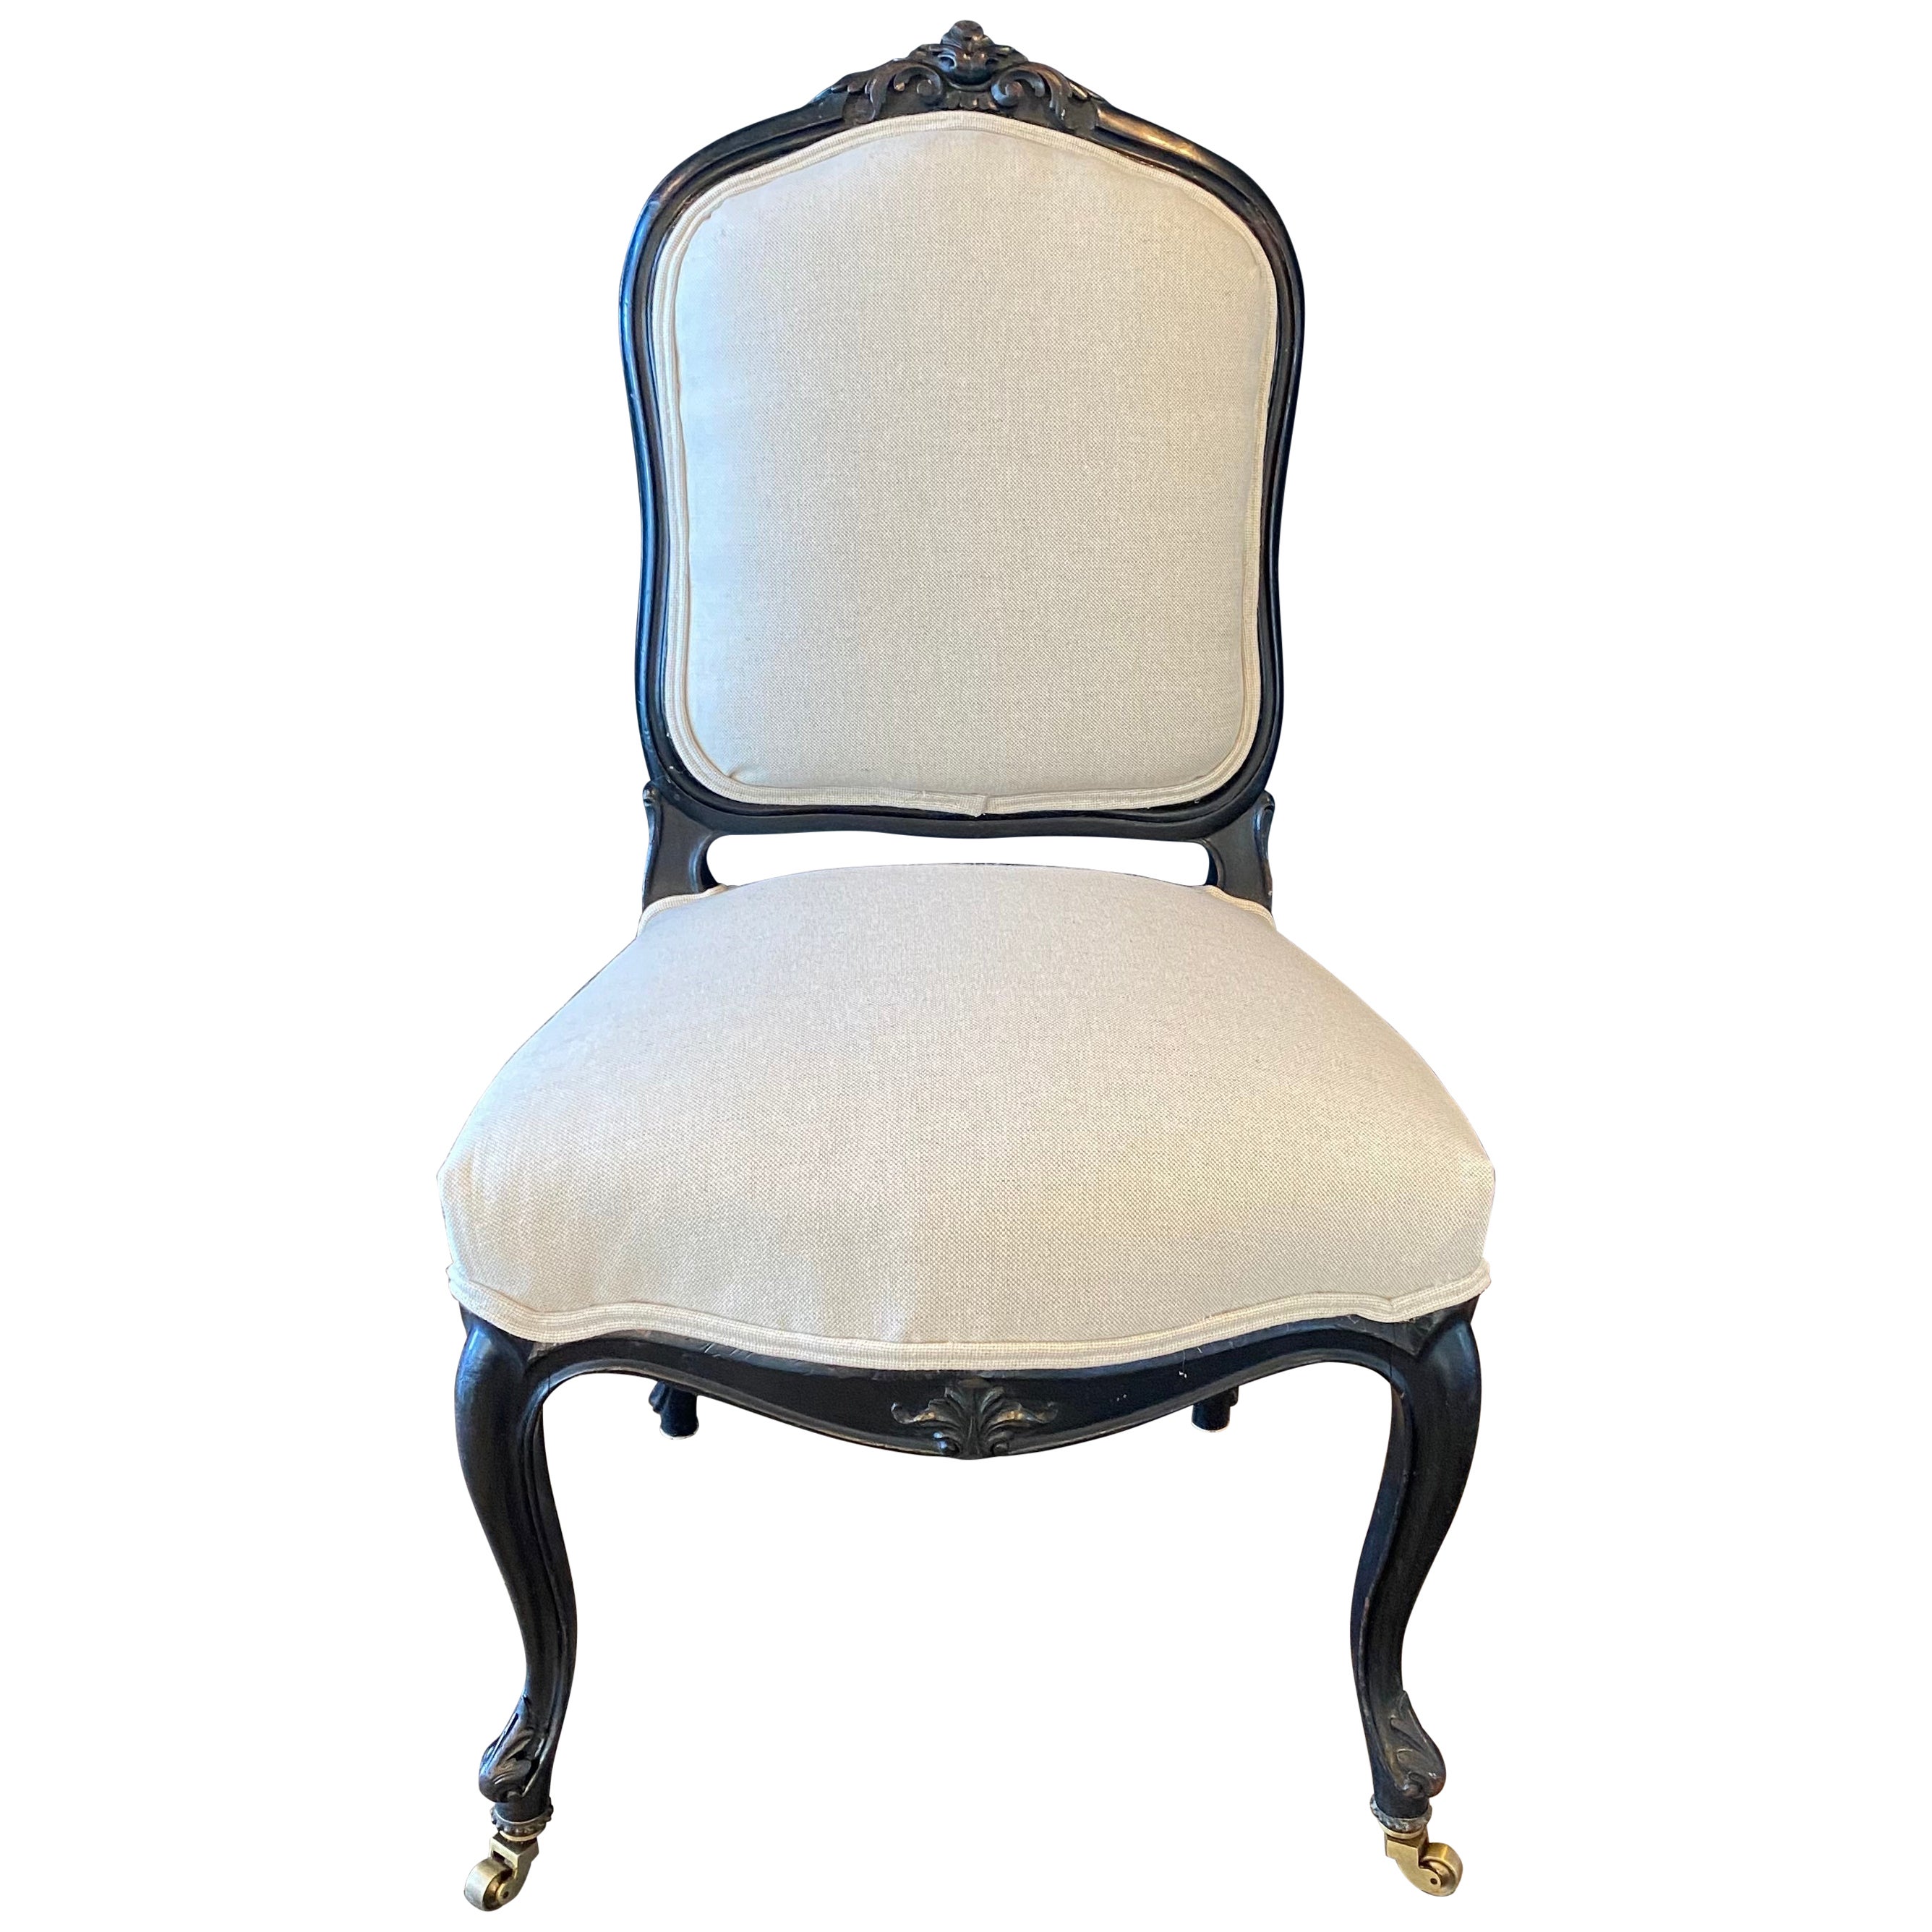 Exquisite French 19th Century Ebonized Napoleon III Side or Parlor Chair For Sale